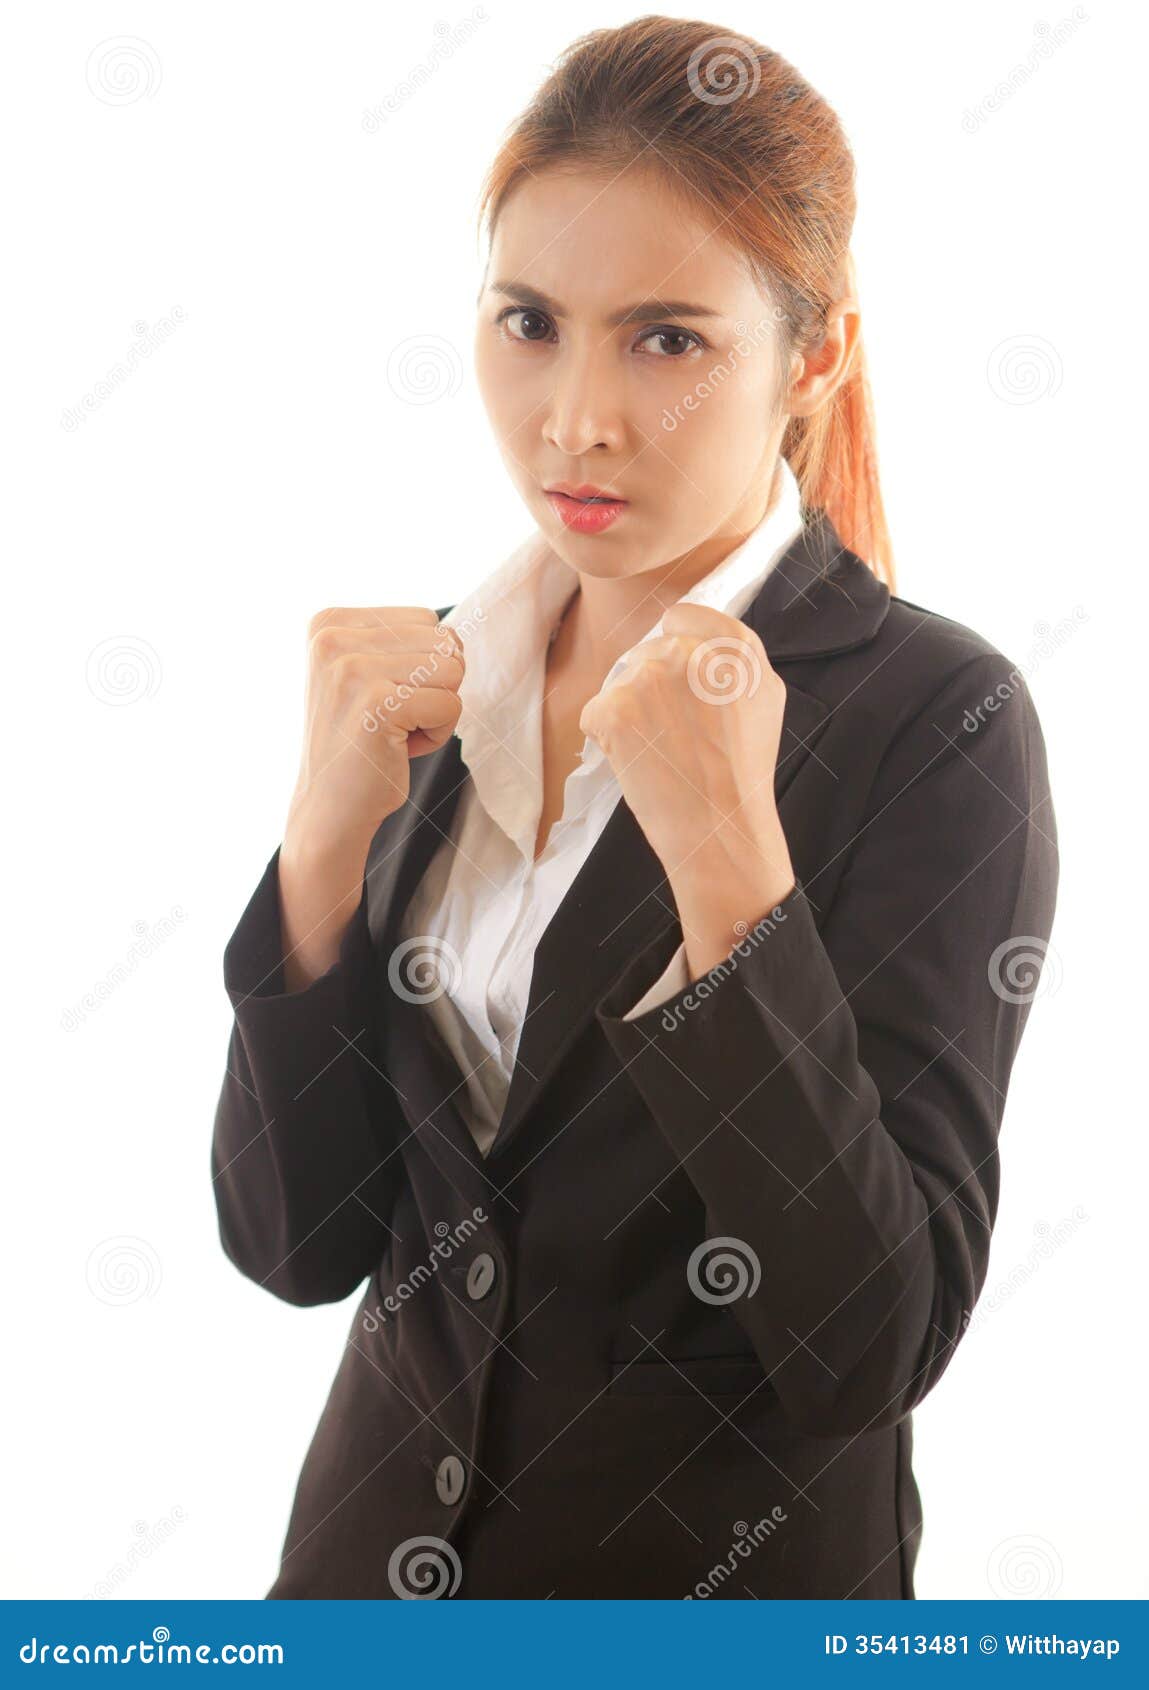 Boxing Business Woman Stock Image Image Of Person Portrait 35413481